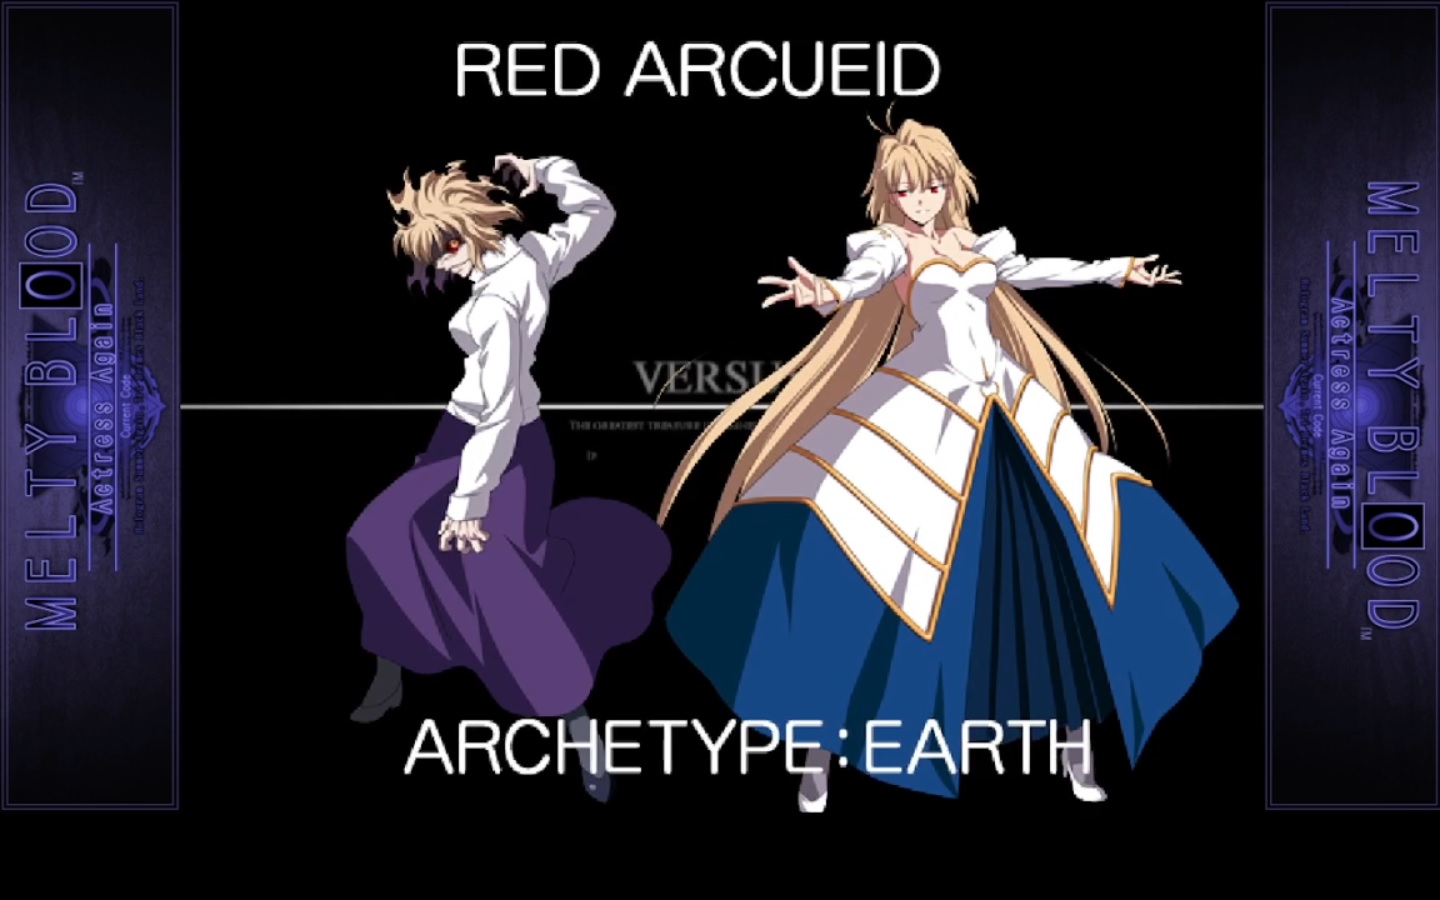 MELTY BLOOD Actress Again Current Code.Red Arcueid vs Archetype Earth [暴走アルクェイドVSアルクェイド]